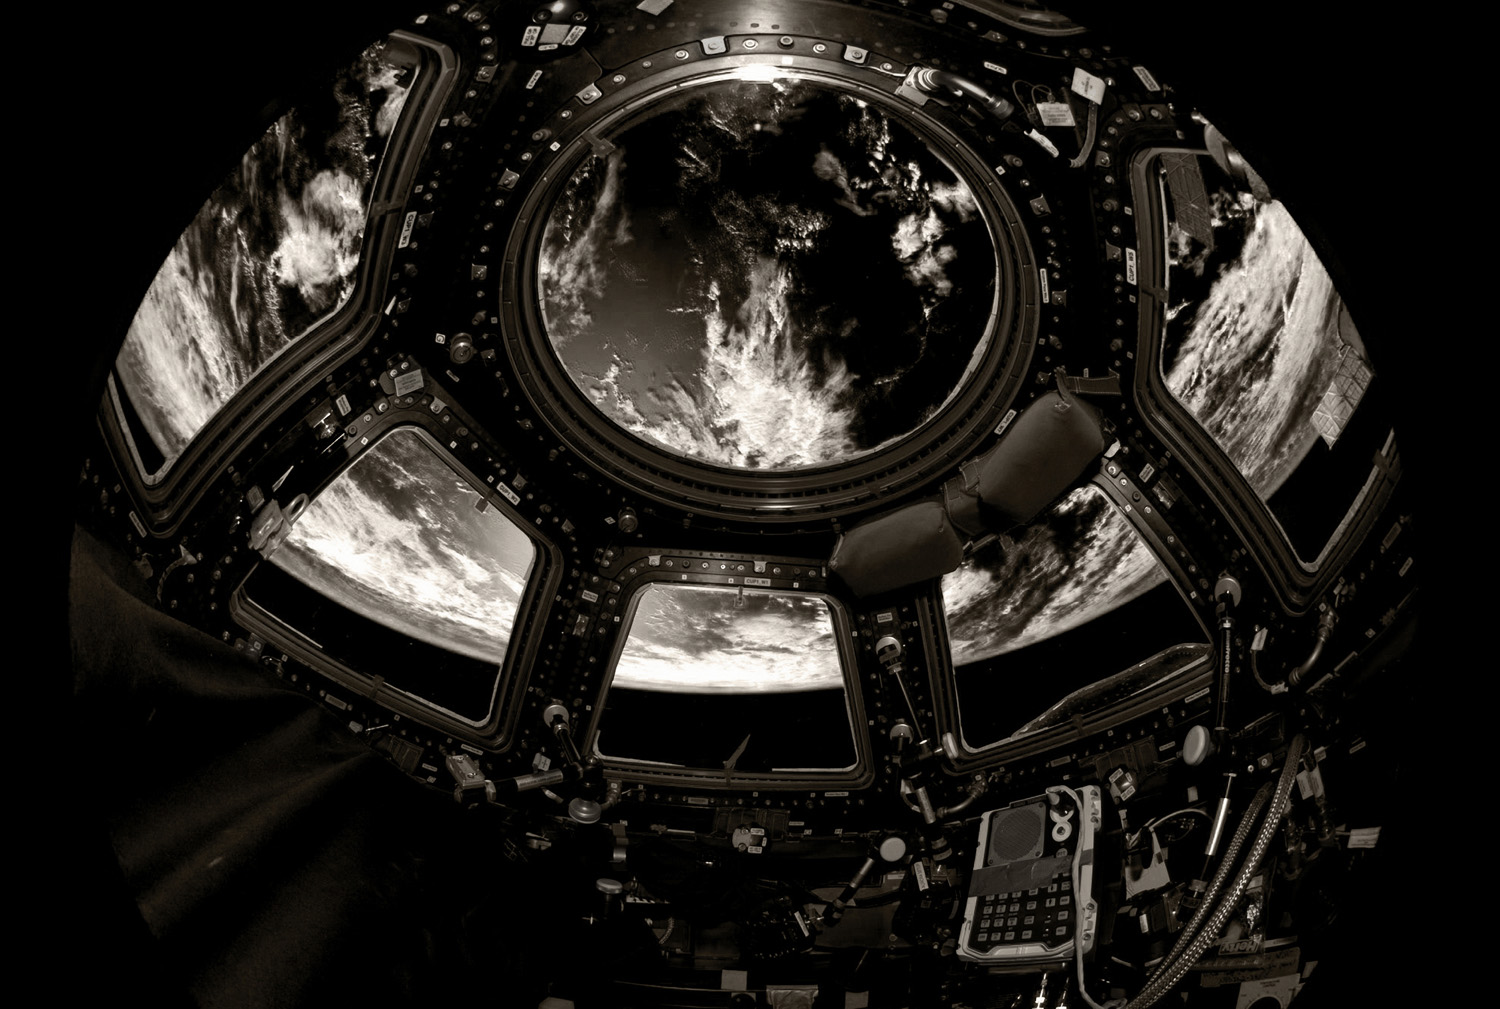 International Space Station Cupola windows with Earth view